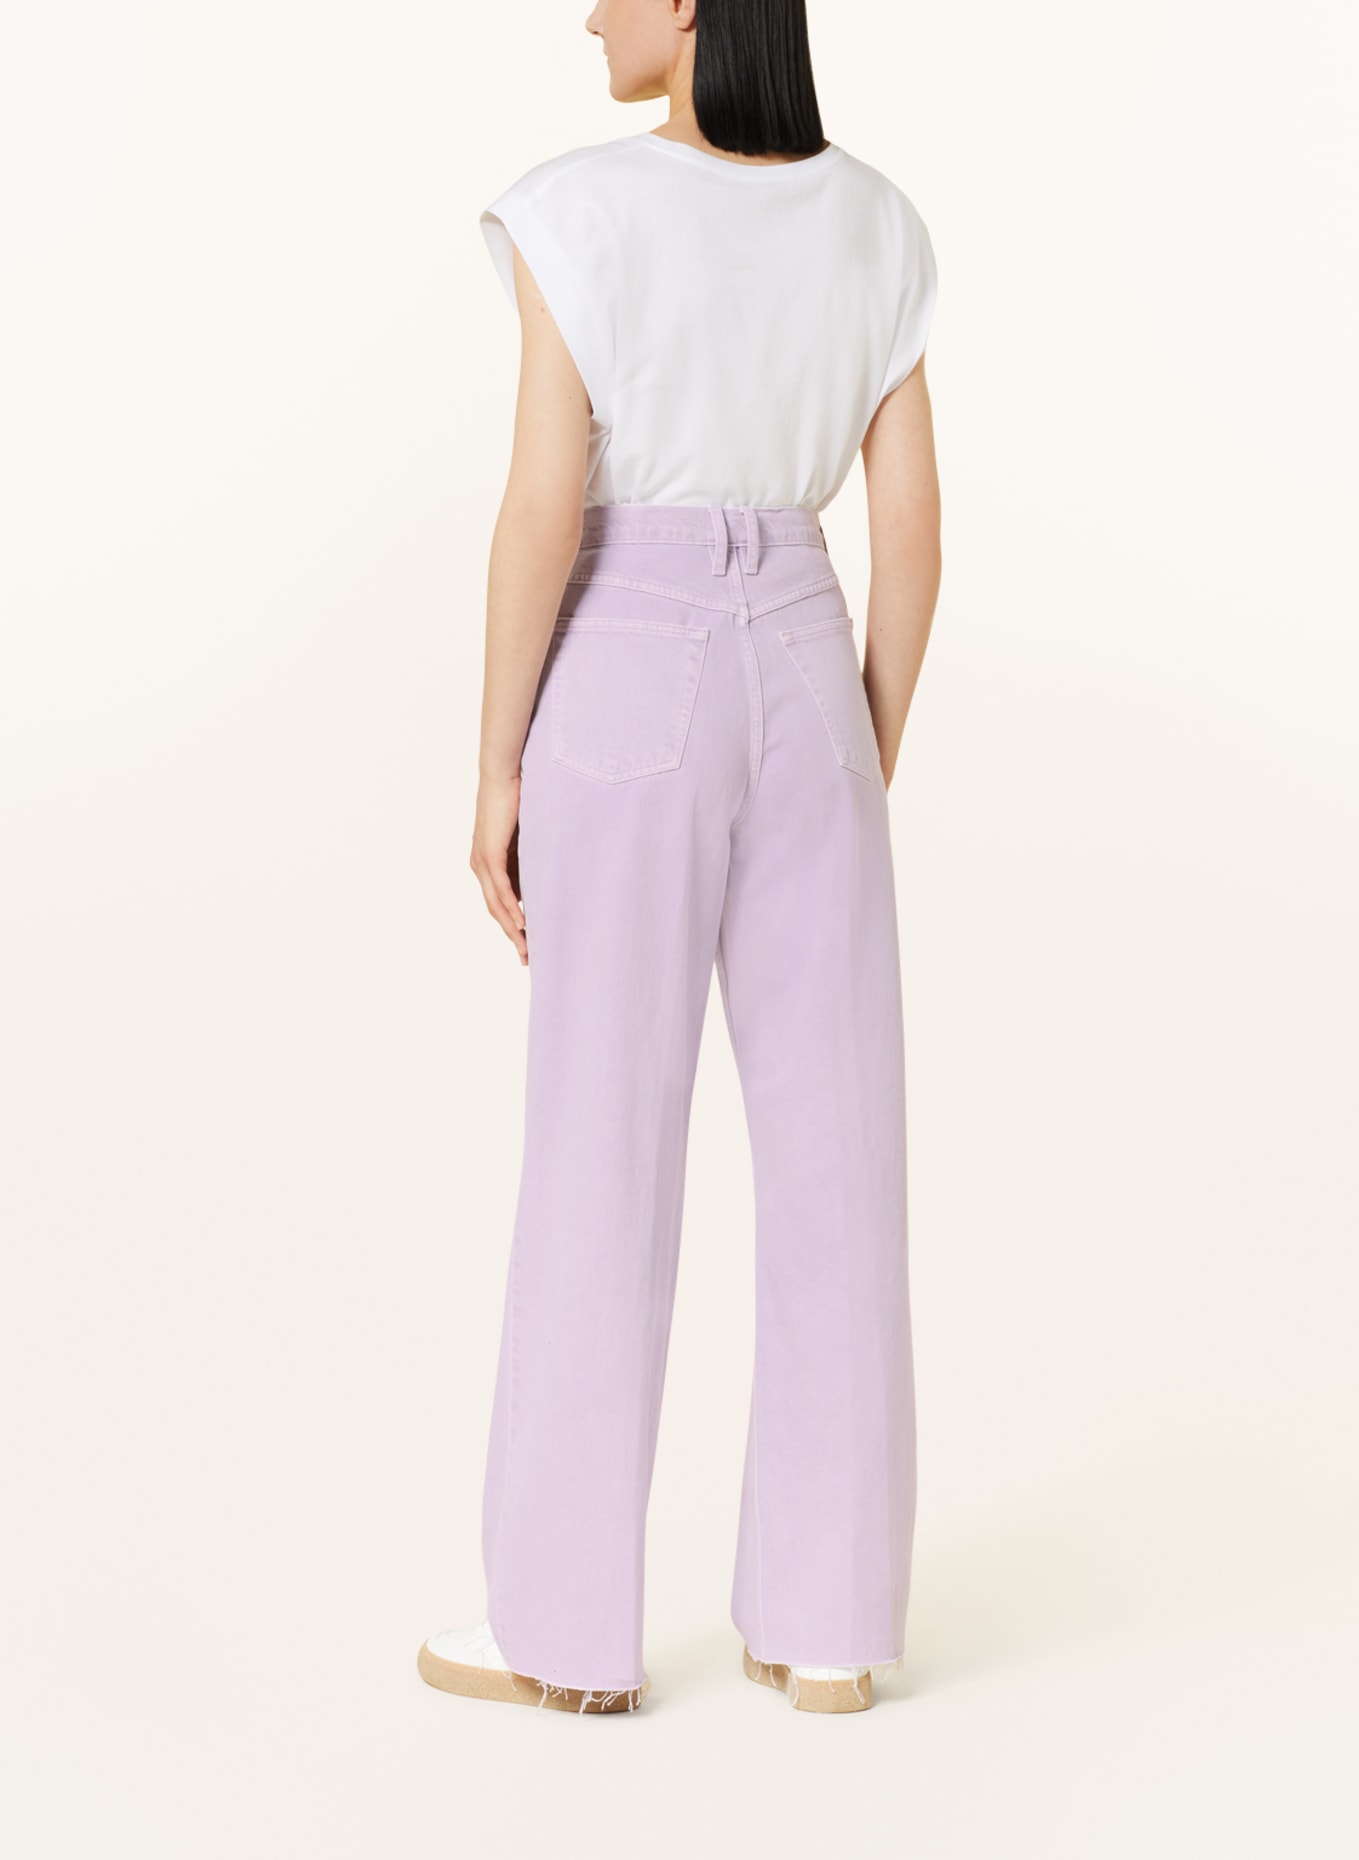 FRAME Jeans LE HIGH 'N' TIGHT, Farbe: WALI WASHED LILAC (Bild 3)